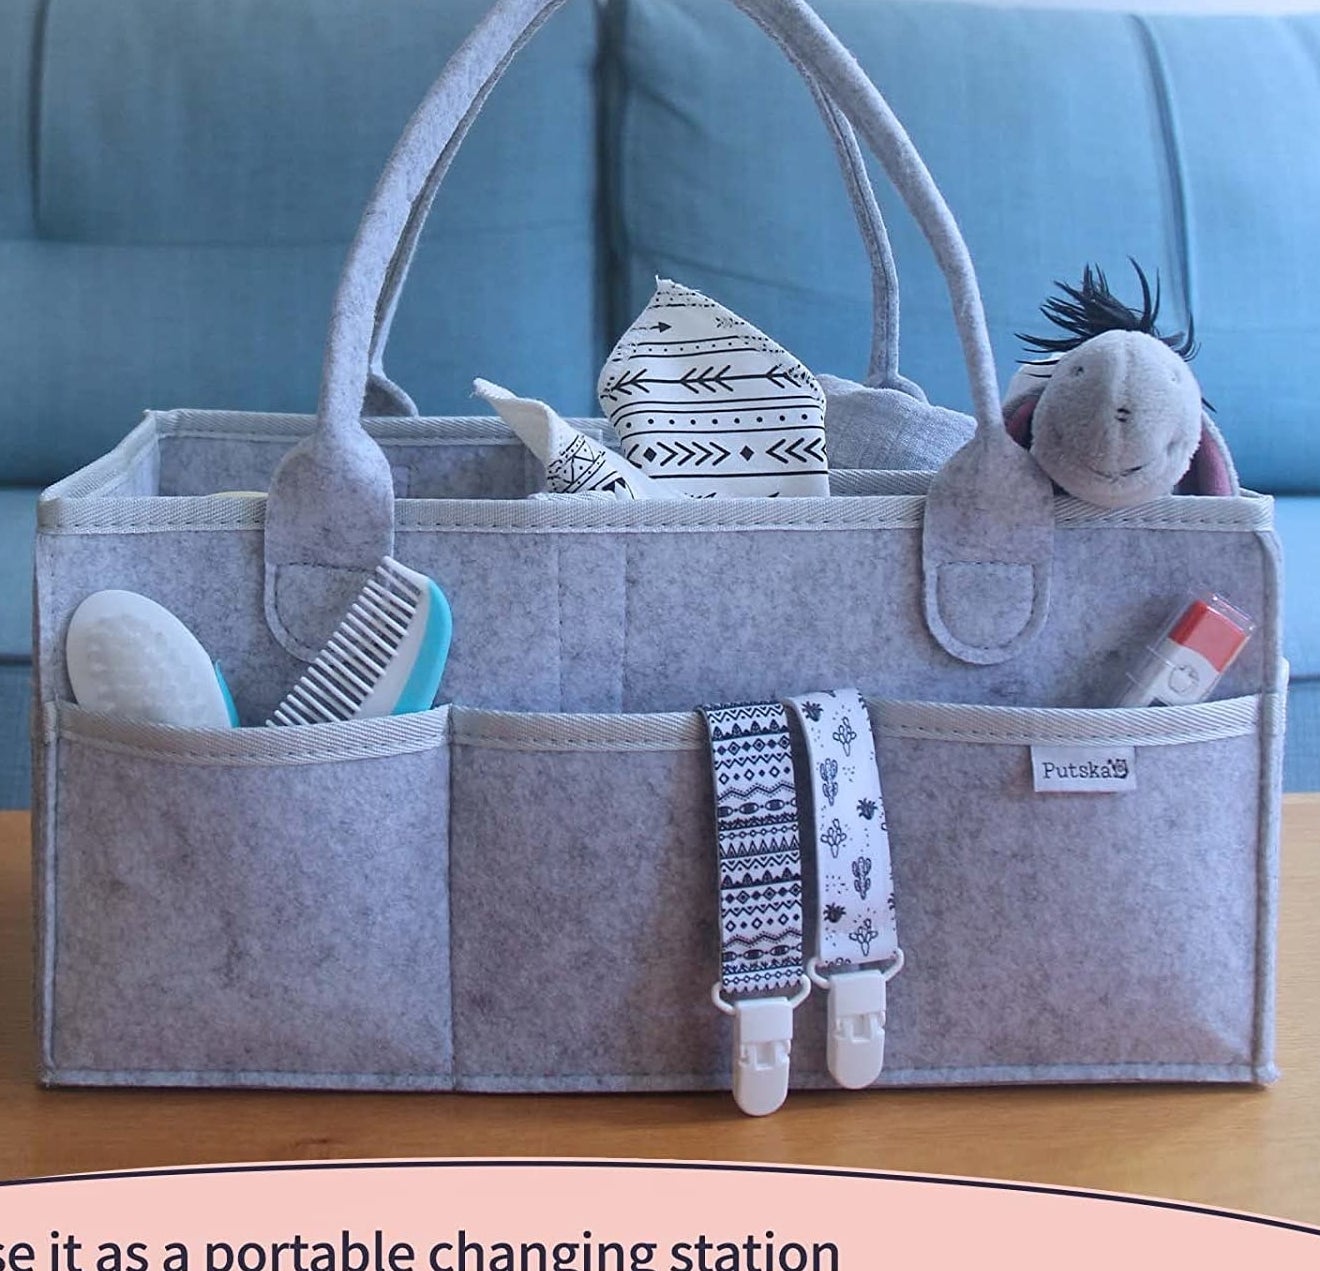 The tote stuffed with toys and baby essentials